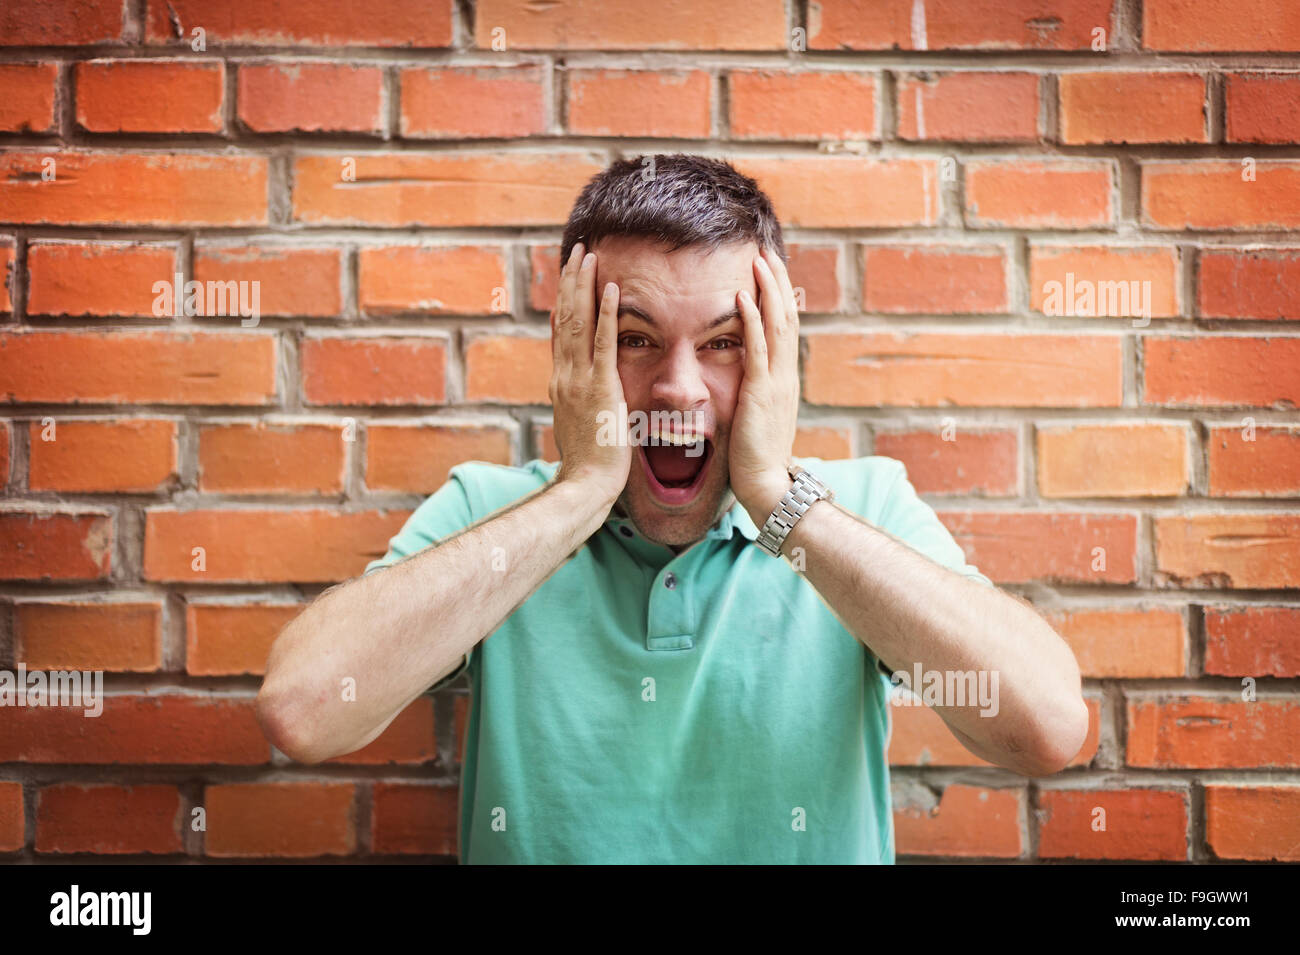 Handsome young man making funny faces on a brick wall background Stock Photo